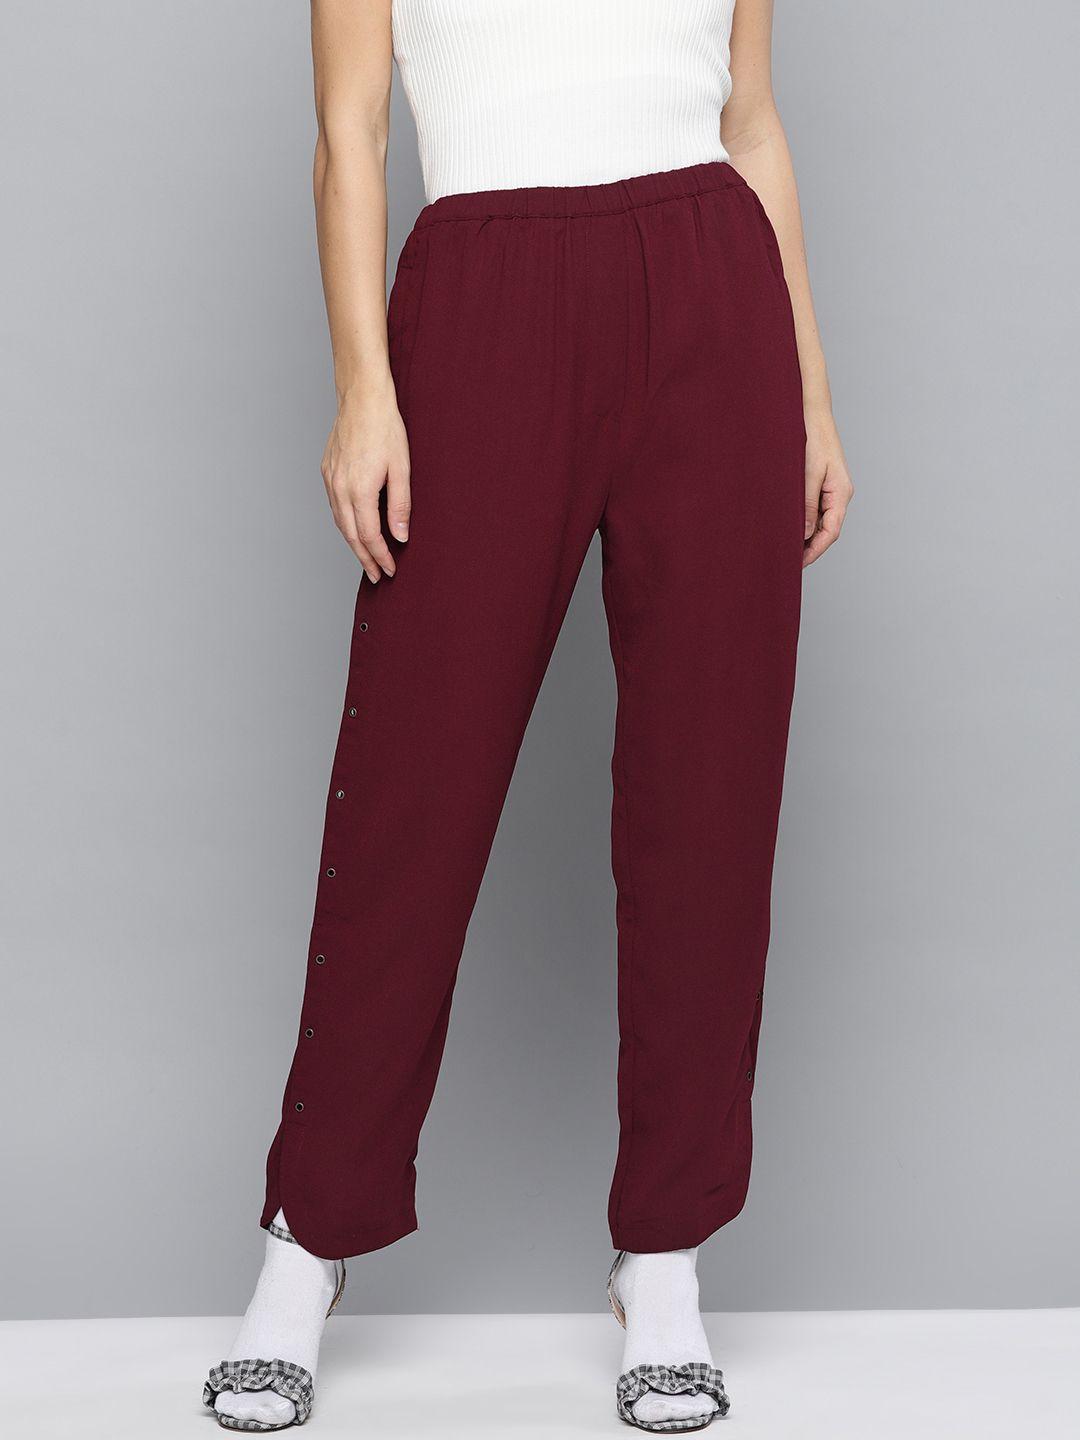 marie claire women maroon comfort fit solid regular trousers